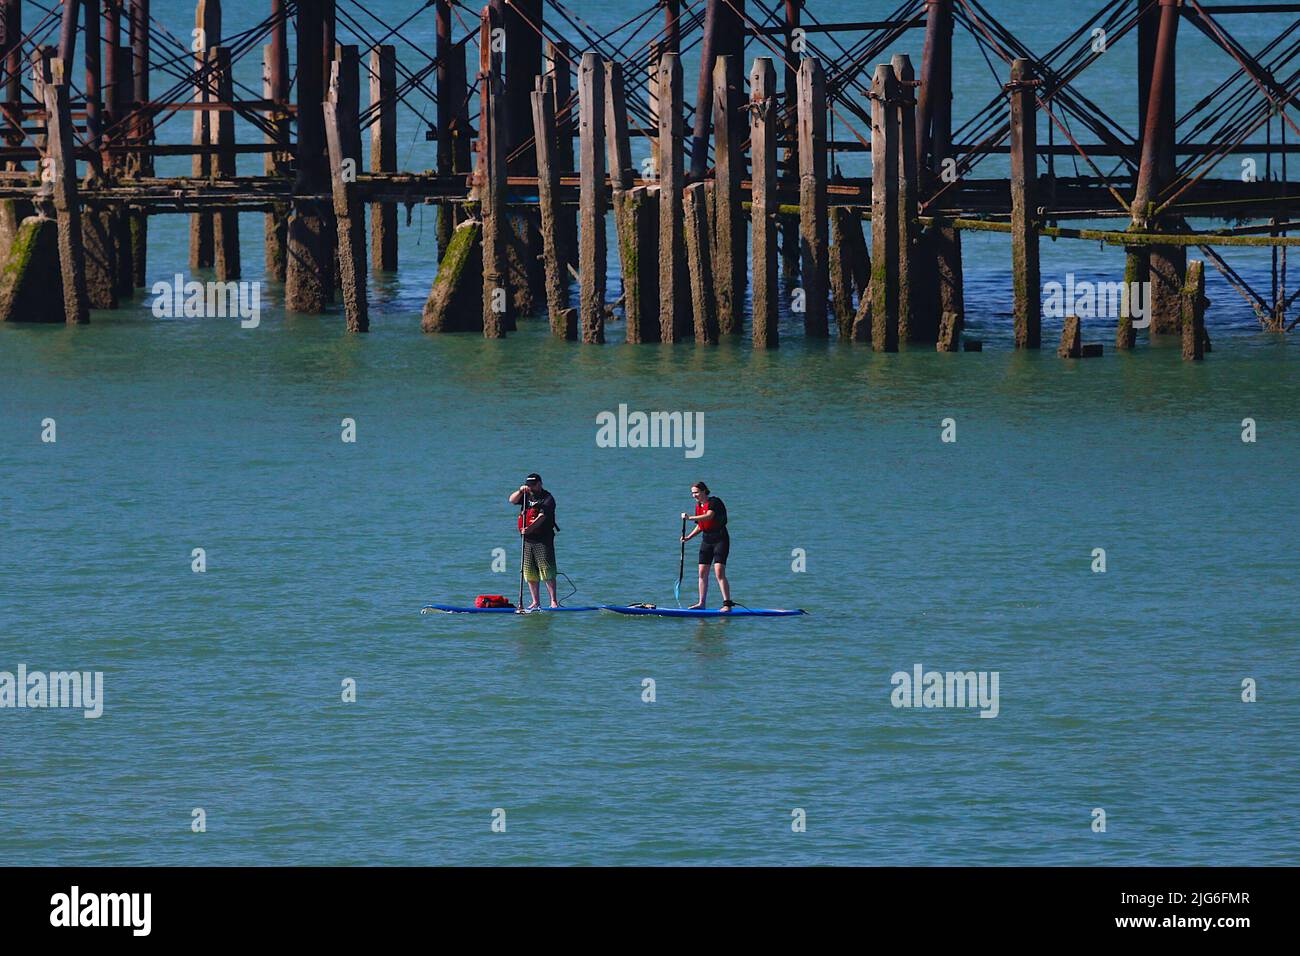 Hastings, East Sussex, UK. 08 Jul, 2022. UK Weather: Very hot and sunny at the seaside town of Hastings in East Sussex as Brits enjoy the very hot weather today and is expected to reach 29c in some parts of the UK. Paddle boarders near the pier in Hastings. Photo Credit: Paul Lawrenson /Alamy Live News Stock Photo